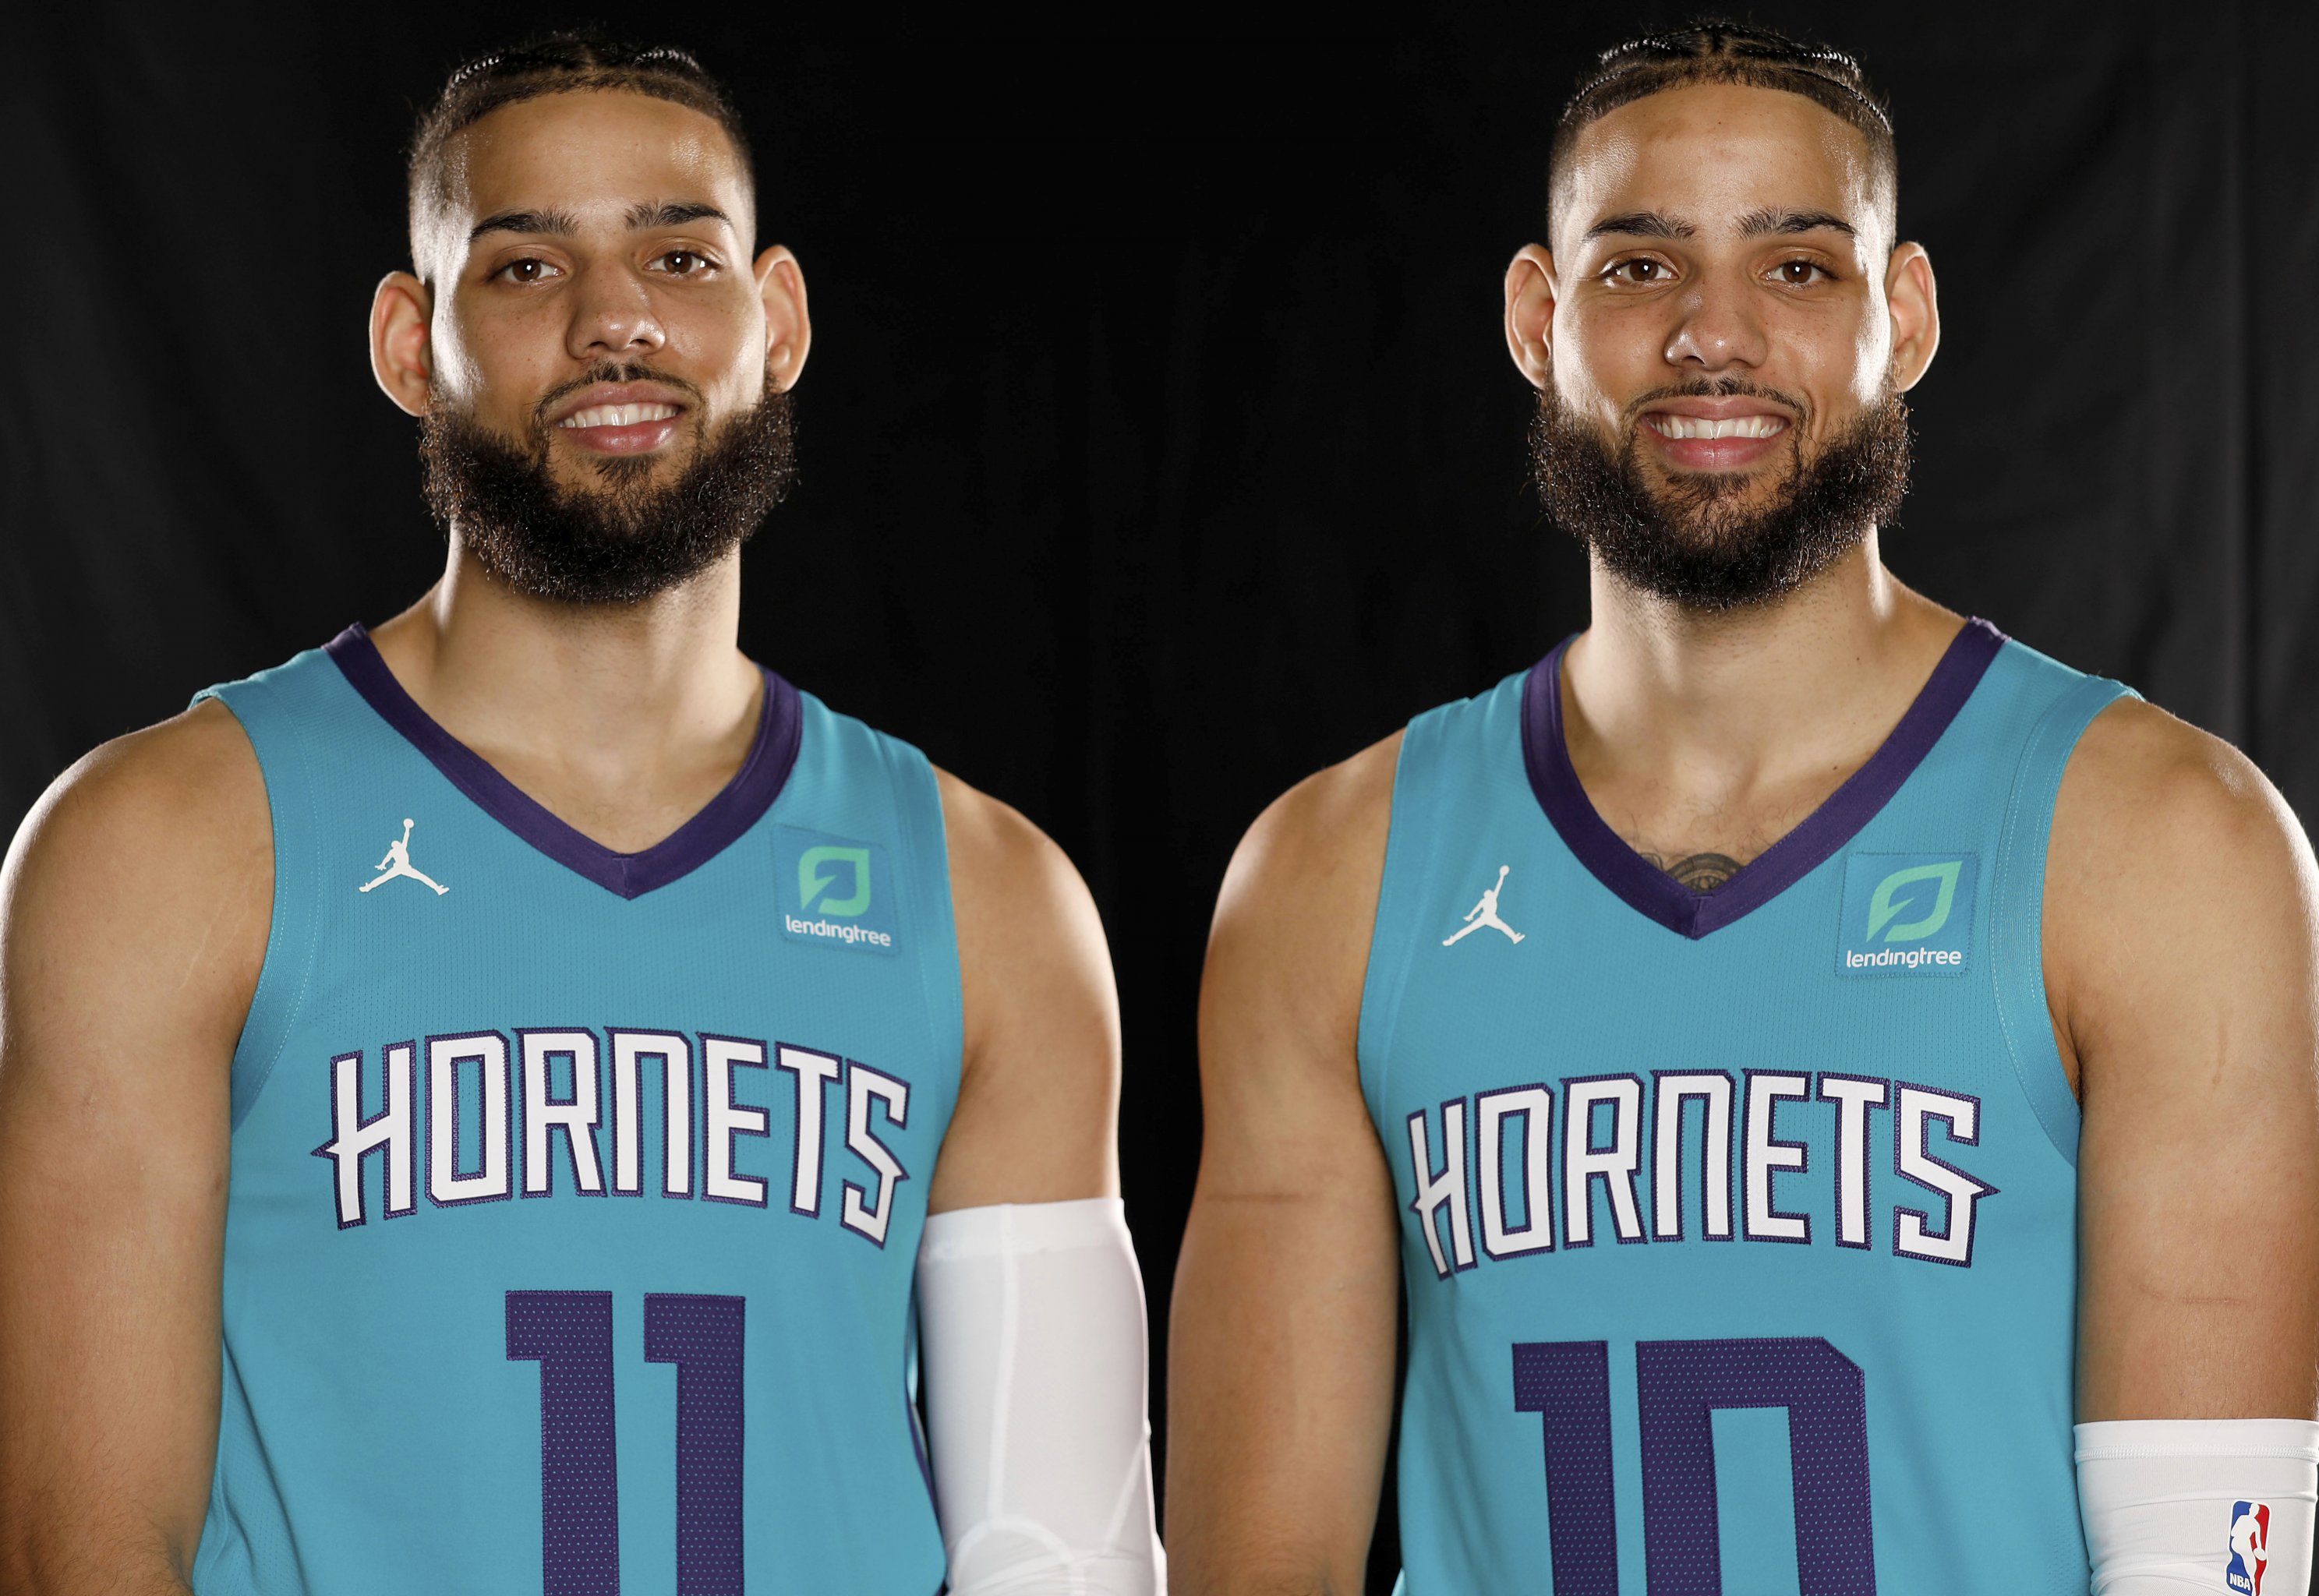 Martin twins now playing for different NBA teams - Davie County